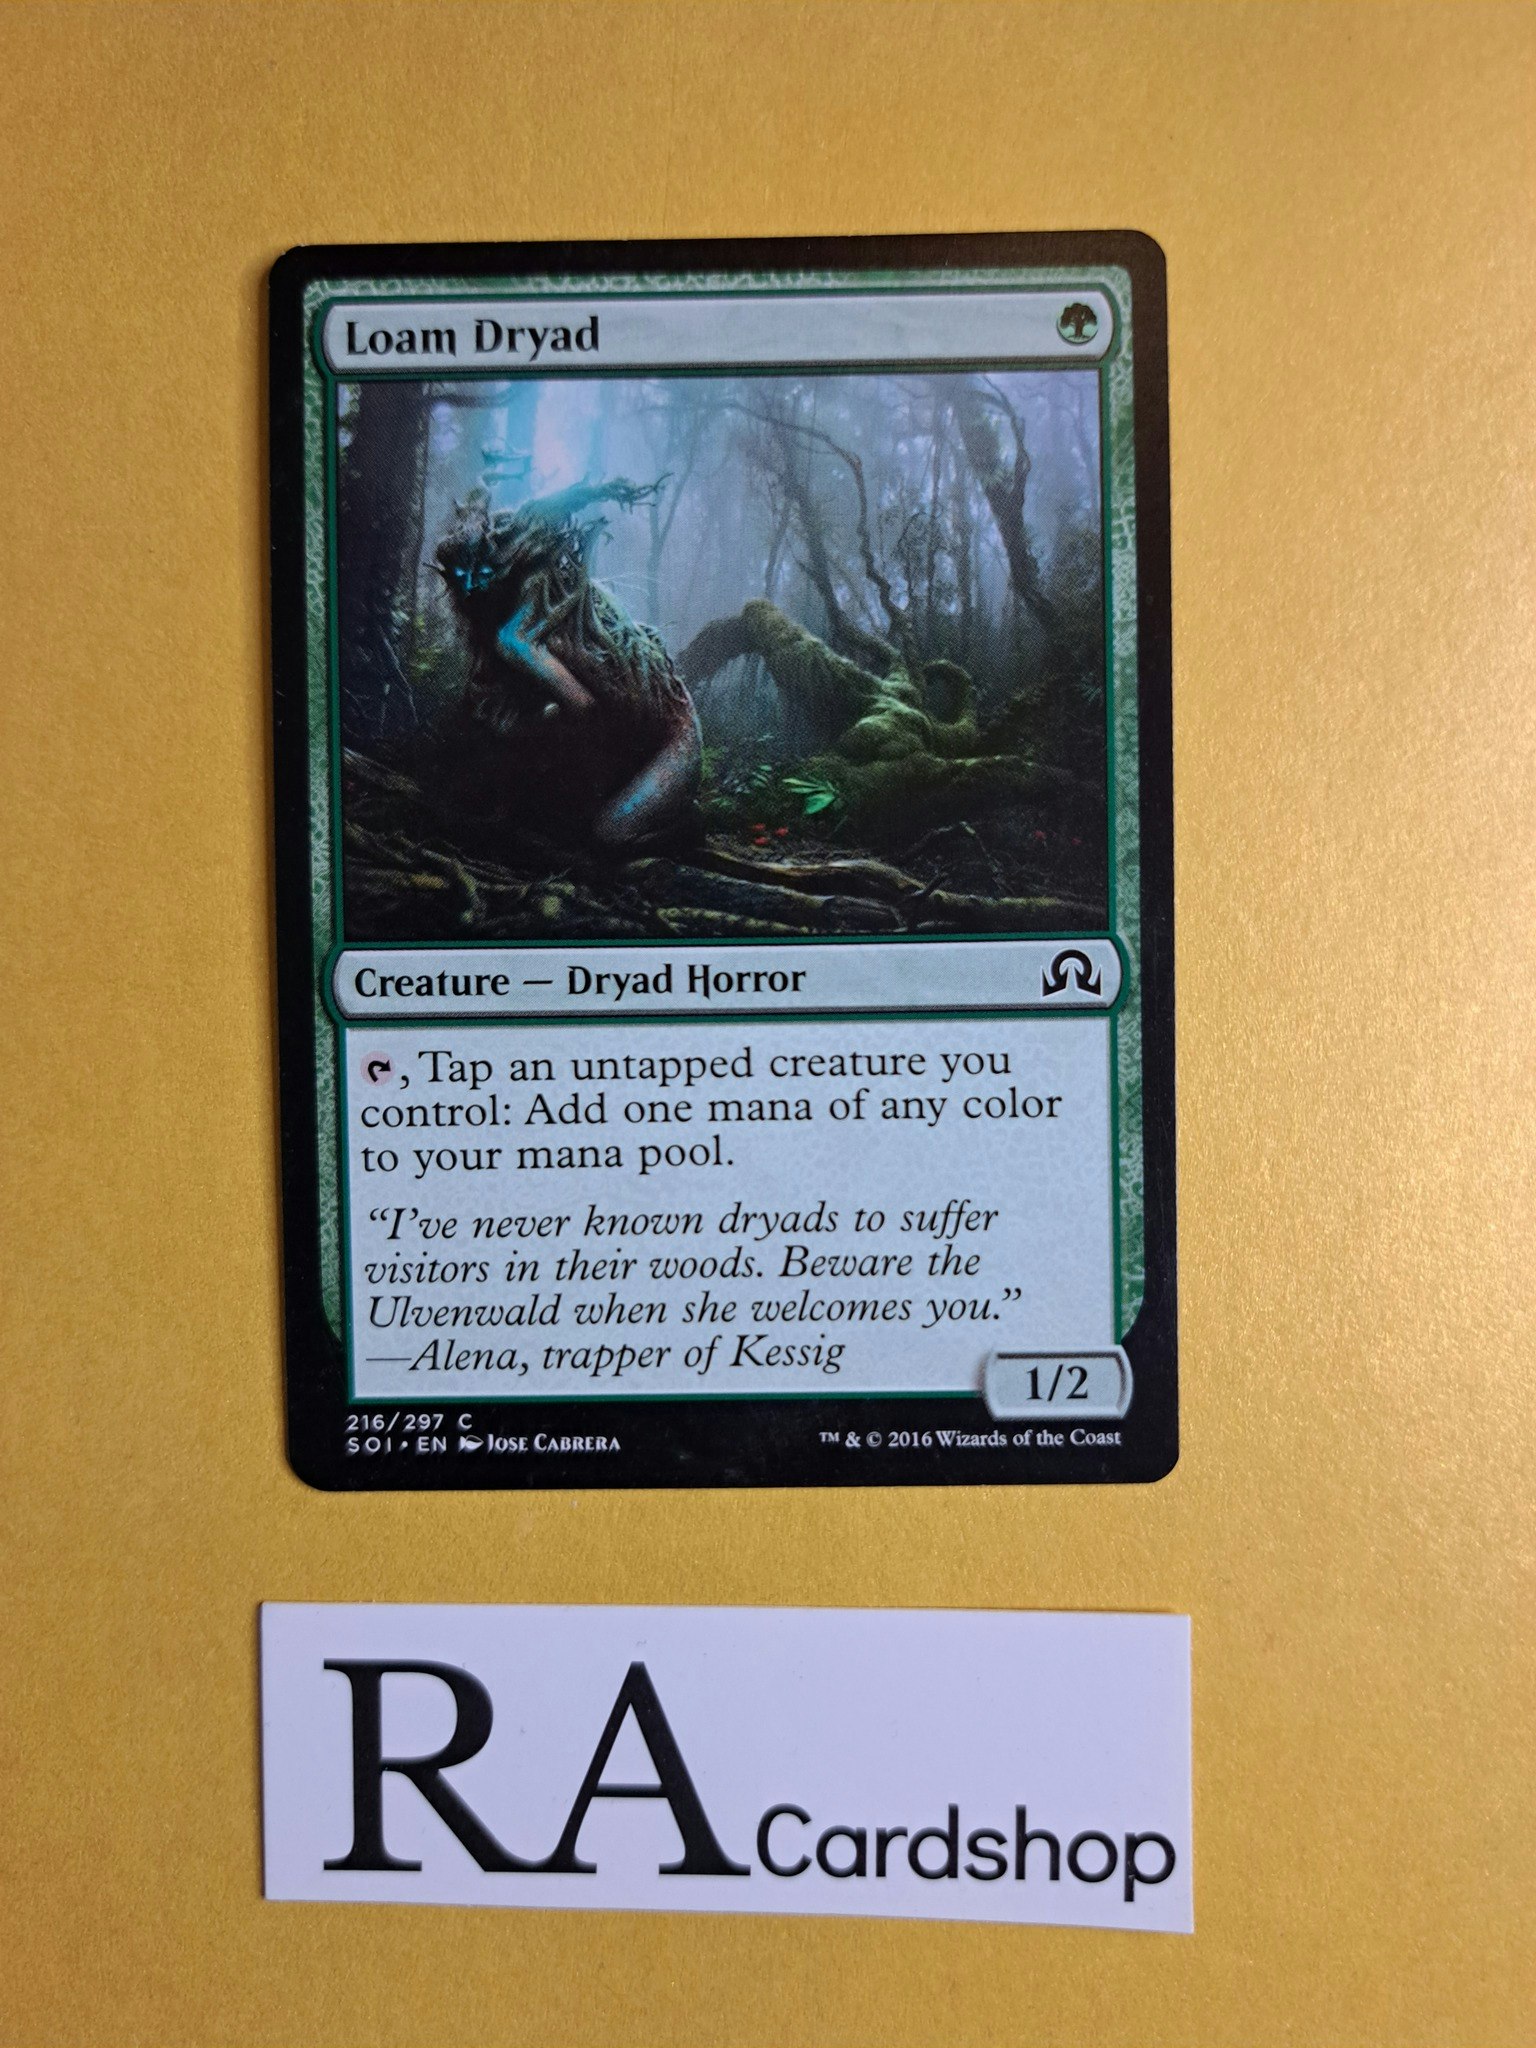 Loam Dryad Common 216/297 Shadows Over Innistrad Magic the Gathering